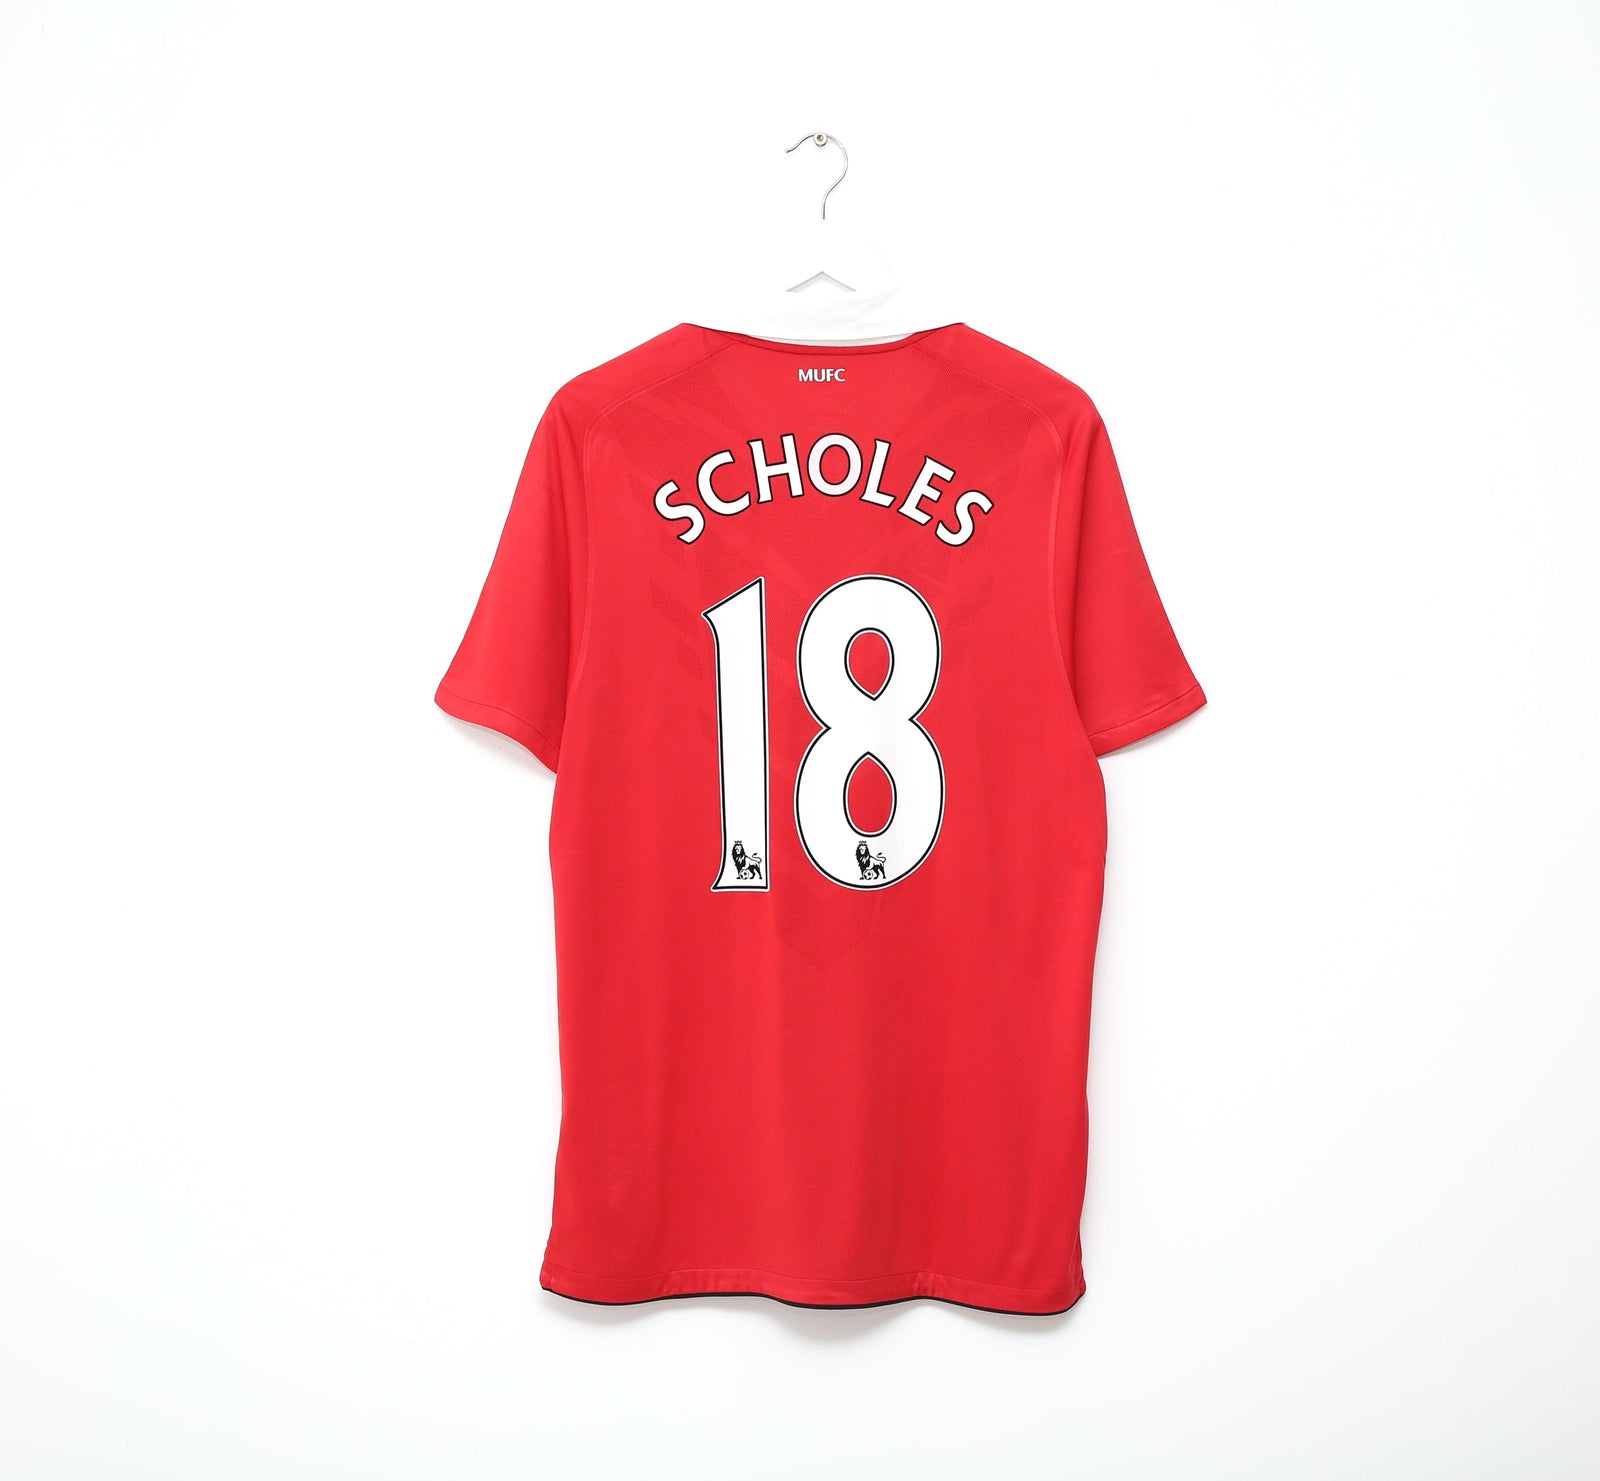 2010/11 SCHOLES #18 Manchester United Vintage Nike Home Football Shirt (M)